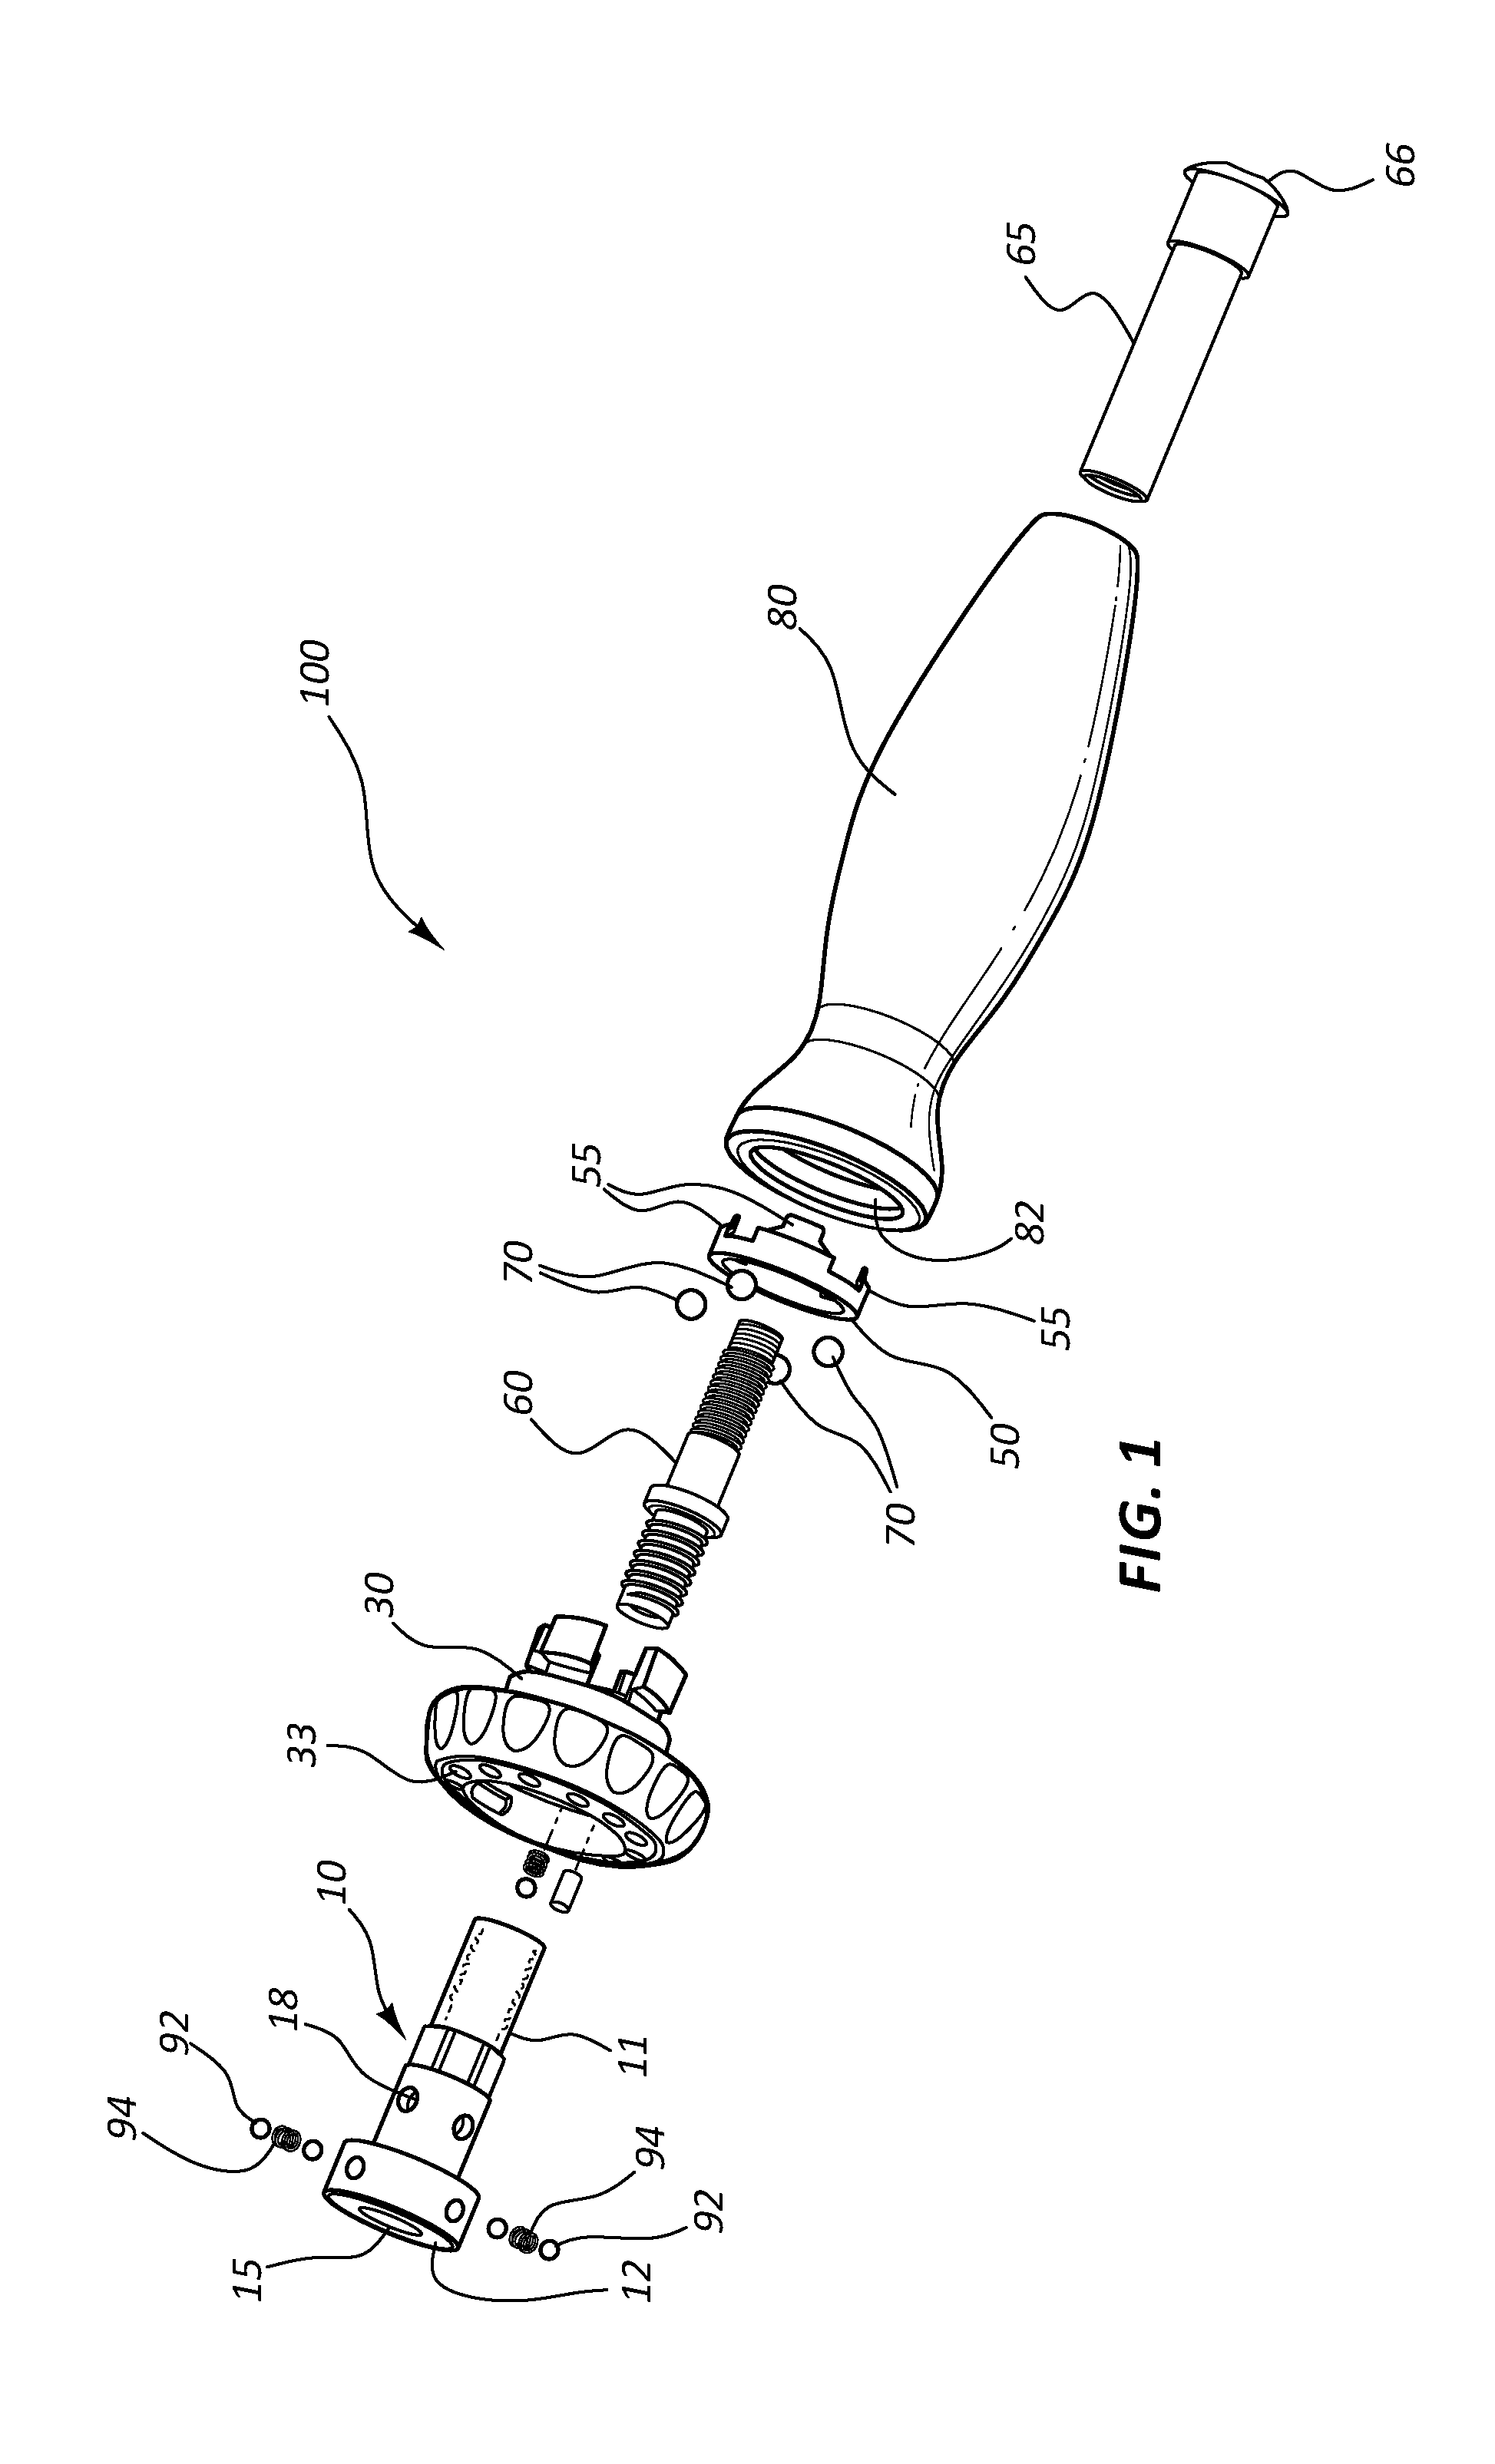 Surgical Instrument Adapter with Highly Secure Locking Shaft Mechanism